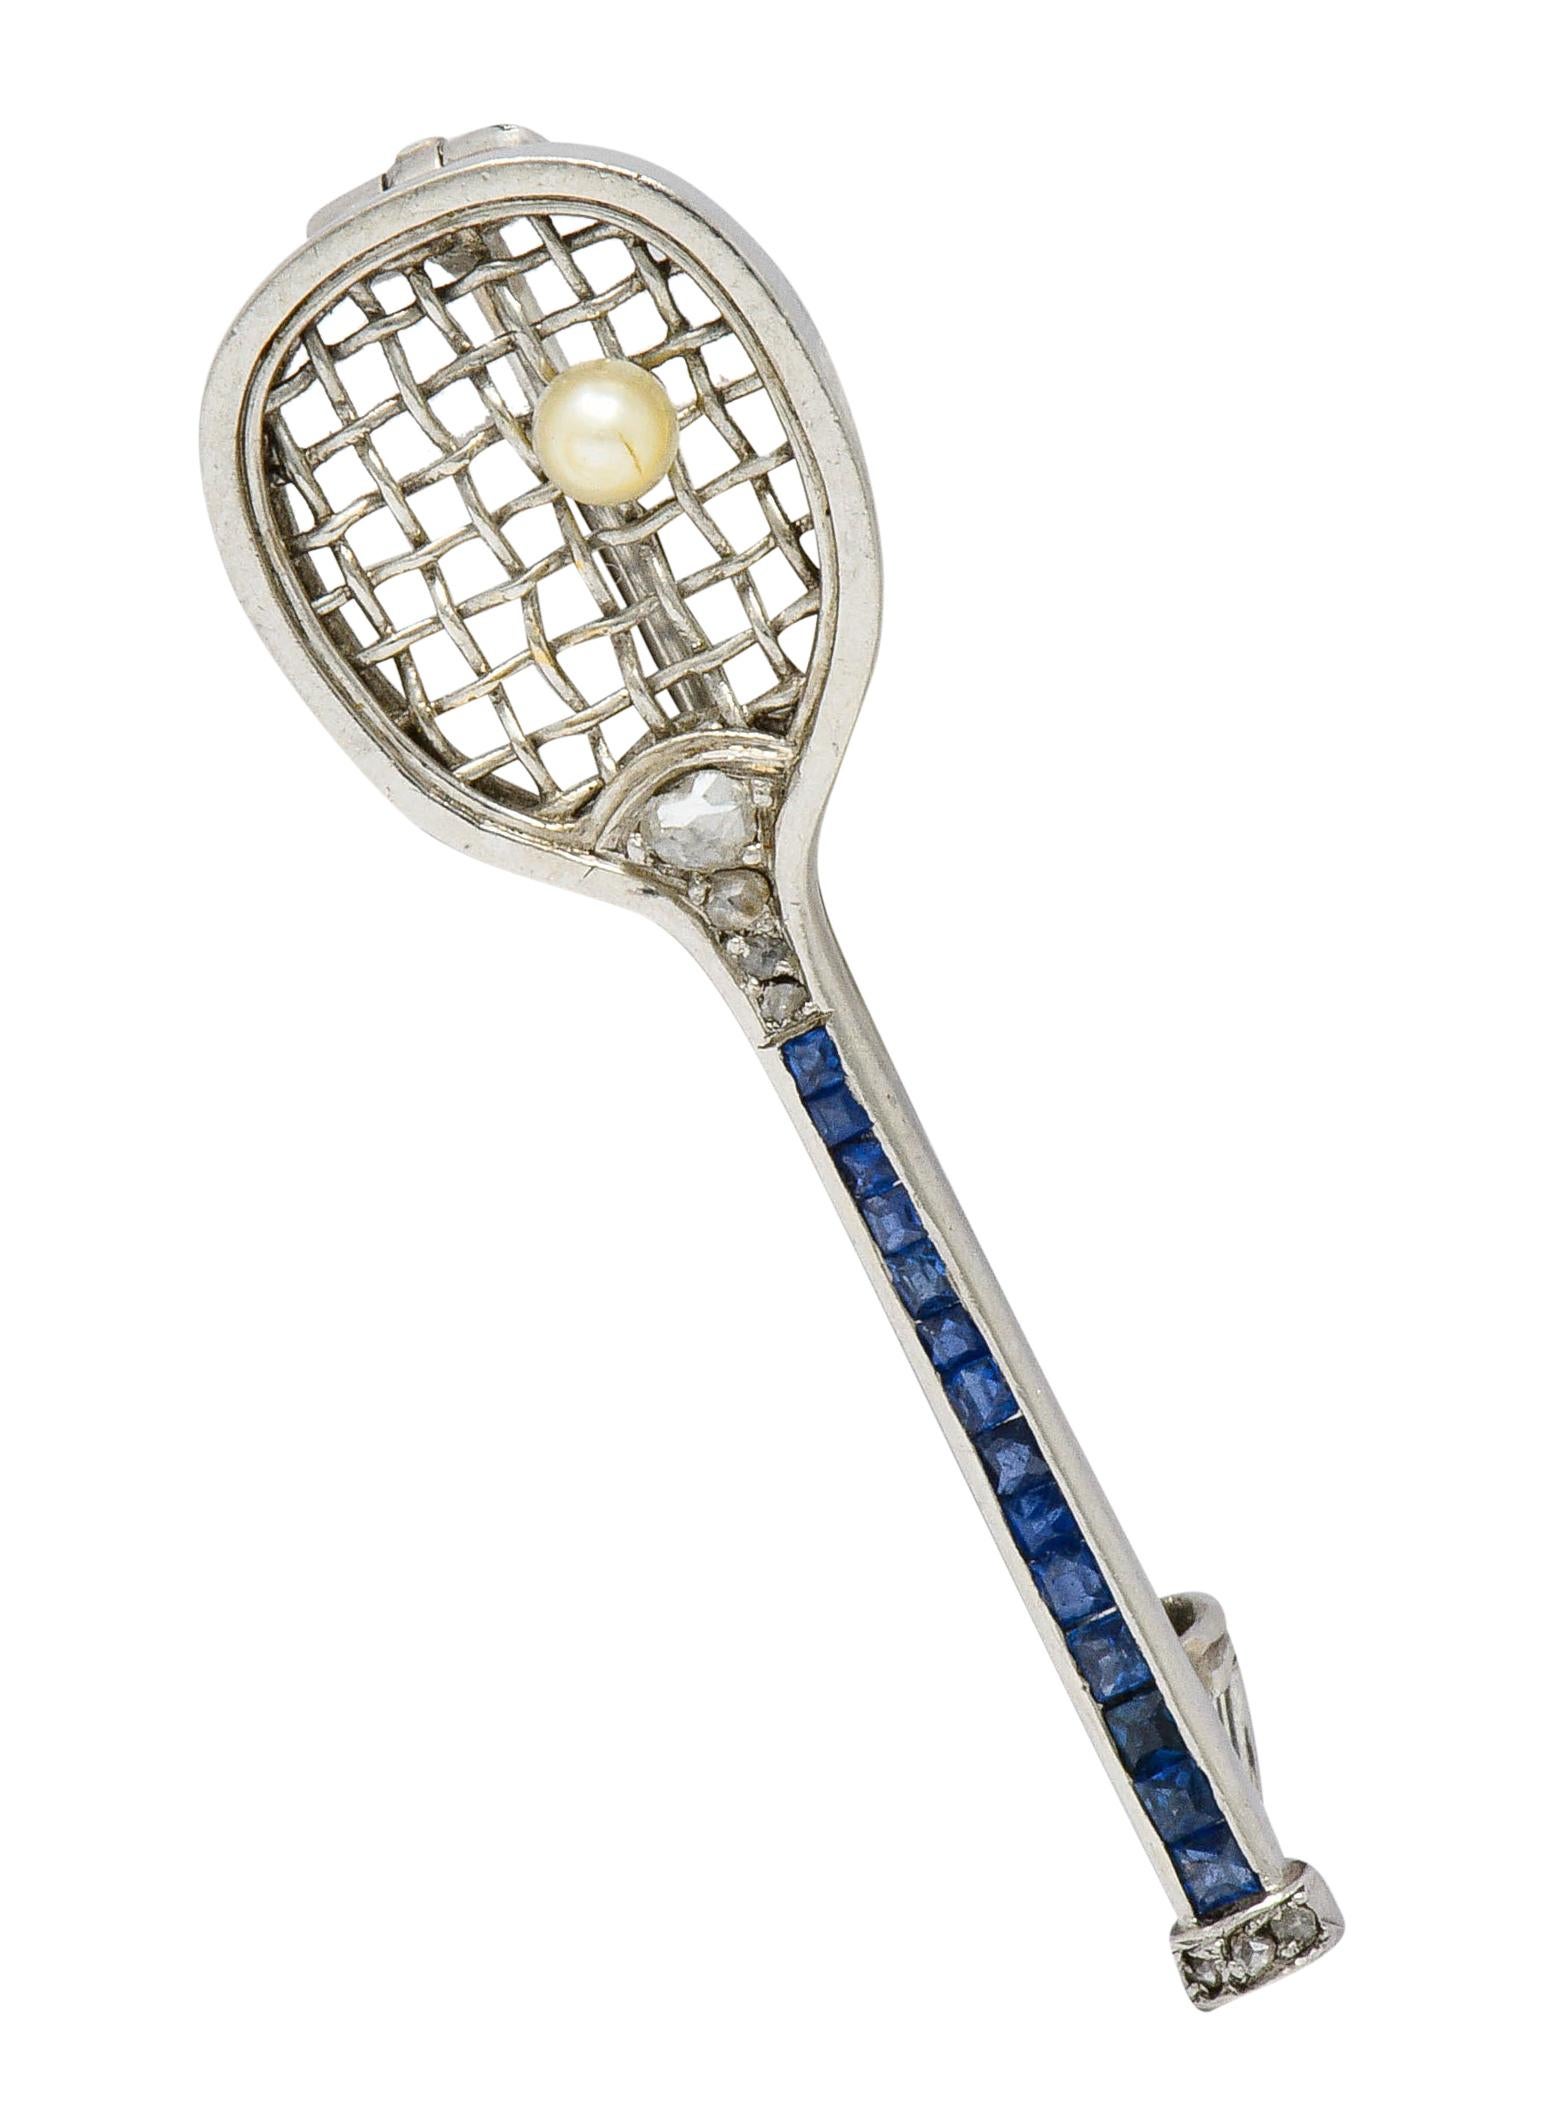 Bar style brooch designed as an antique tennis racket

Hand woven platinum wire net cradles a 3.0 mm round pearl; cream with good luster

Handle is channel set with square cut sapphire and accented by rose cut diamonds

With total weight